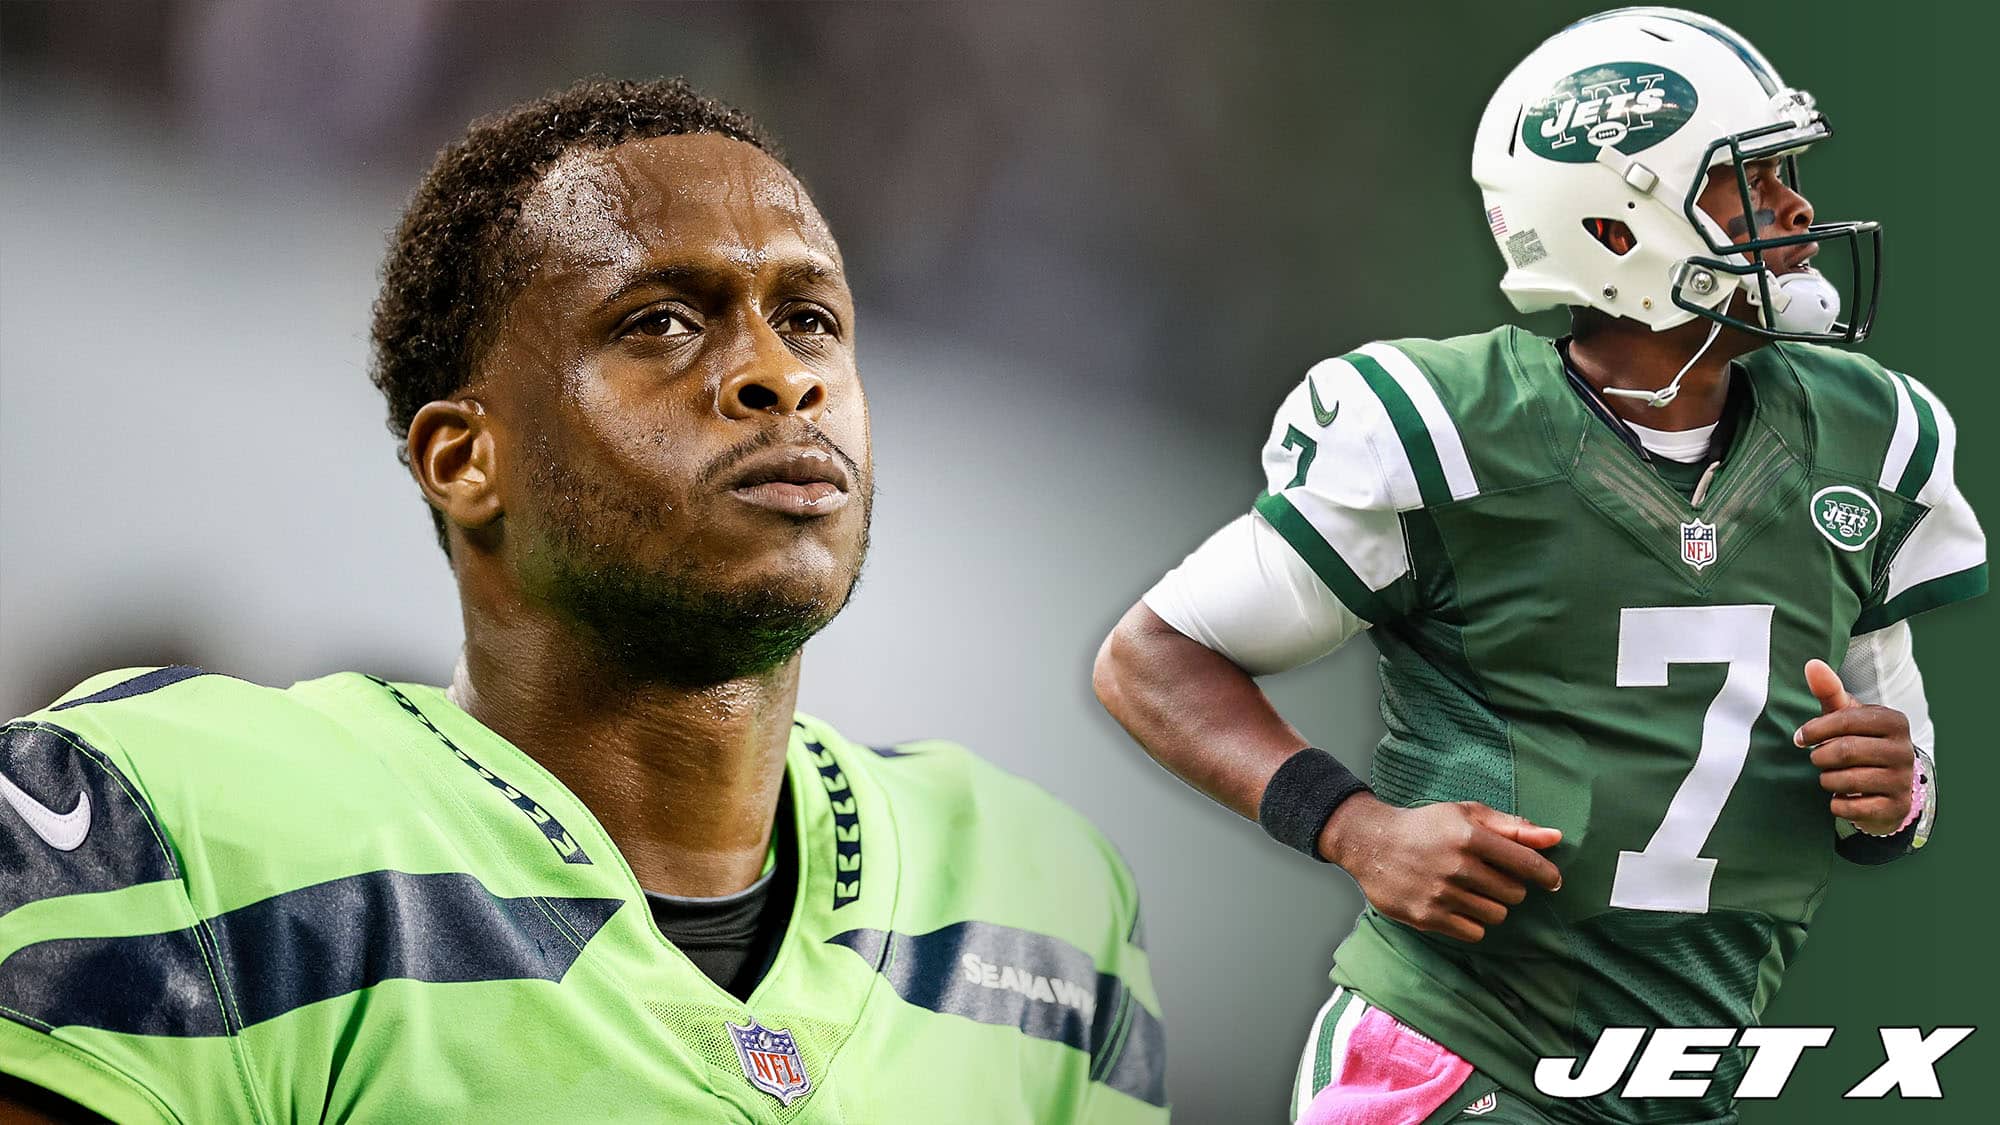 Geno Smith says his time with Jets was 'awesome'